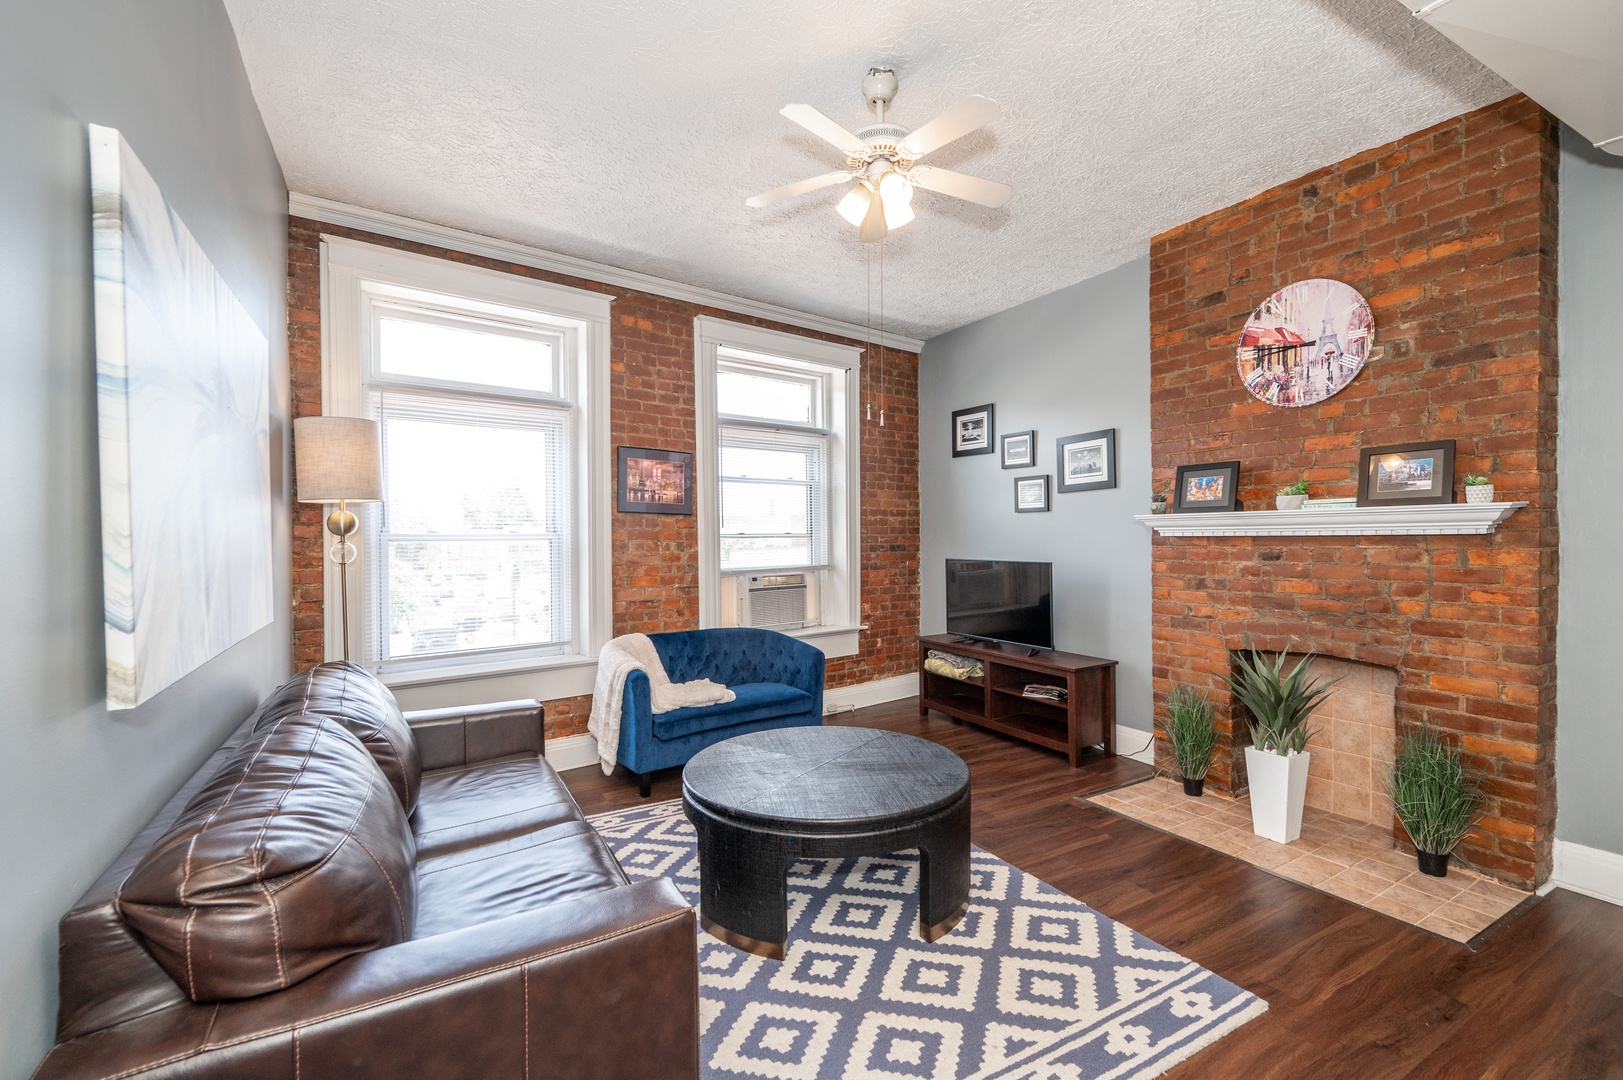 Monmouth Loft 1 offers a spacious living room, 1 bedroom, & 1 bathroom